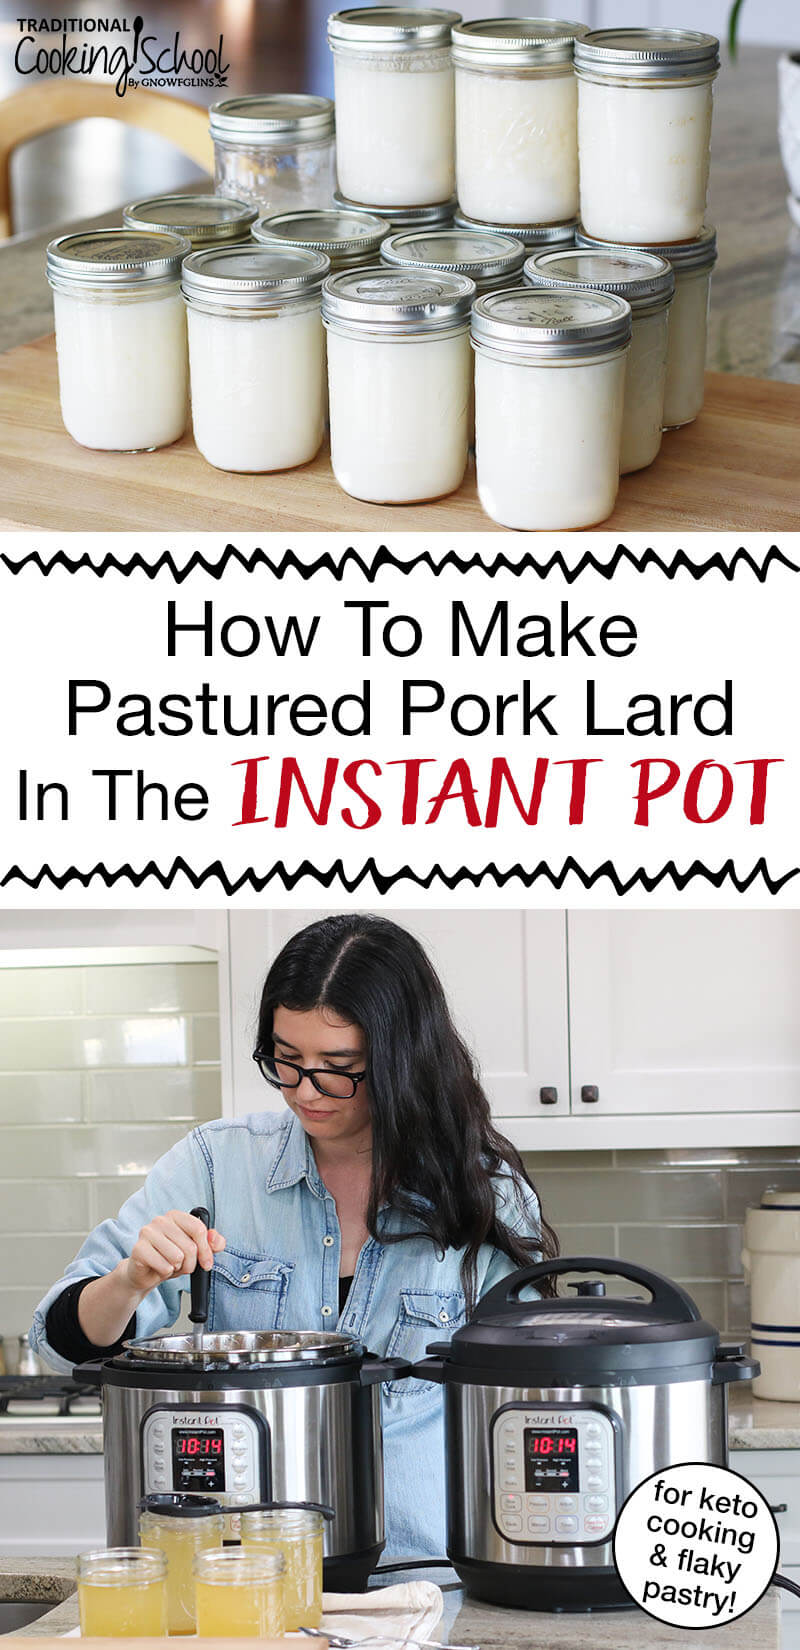 women in kitchen teaching how to make lard in the Instant Pot, including how to store lard and whether or not pork fat goes bad, with text overlay: "How To Make Grass-Fed Pork Lard In The Instant Pot (for keto cooking & flaky pastry!)"